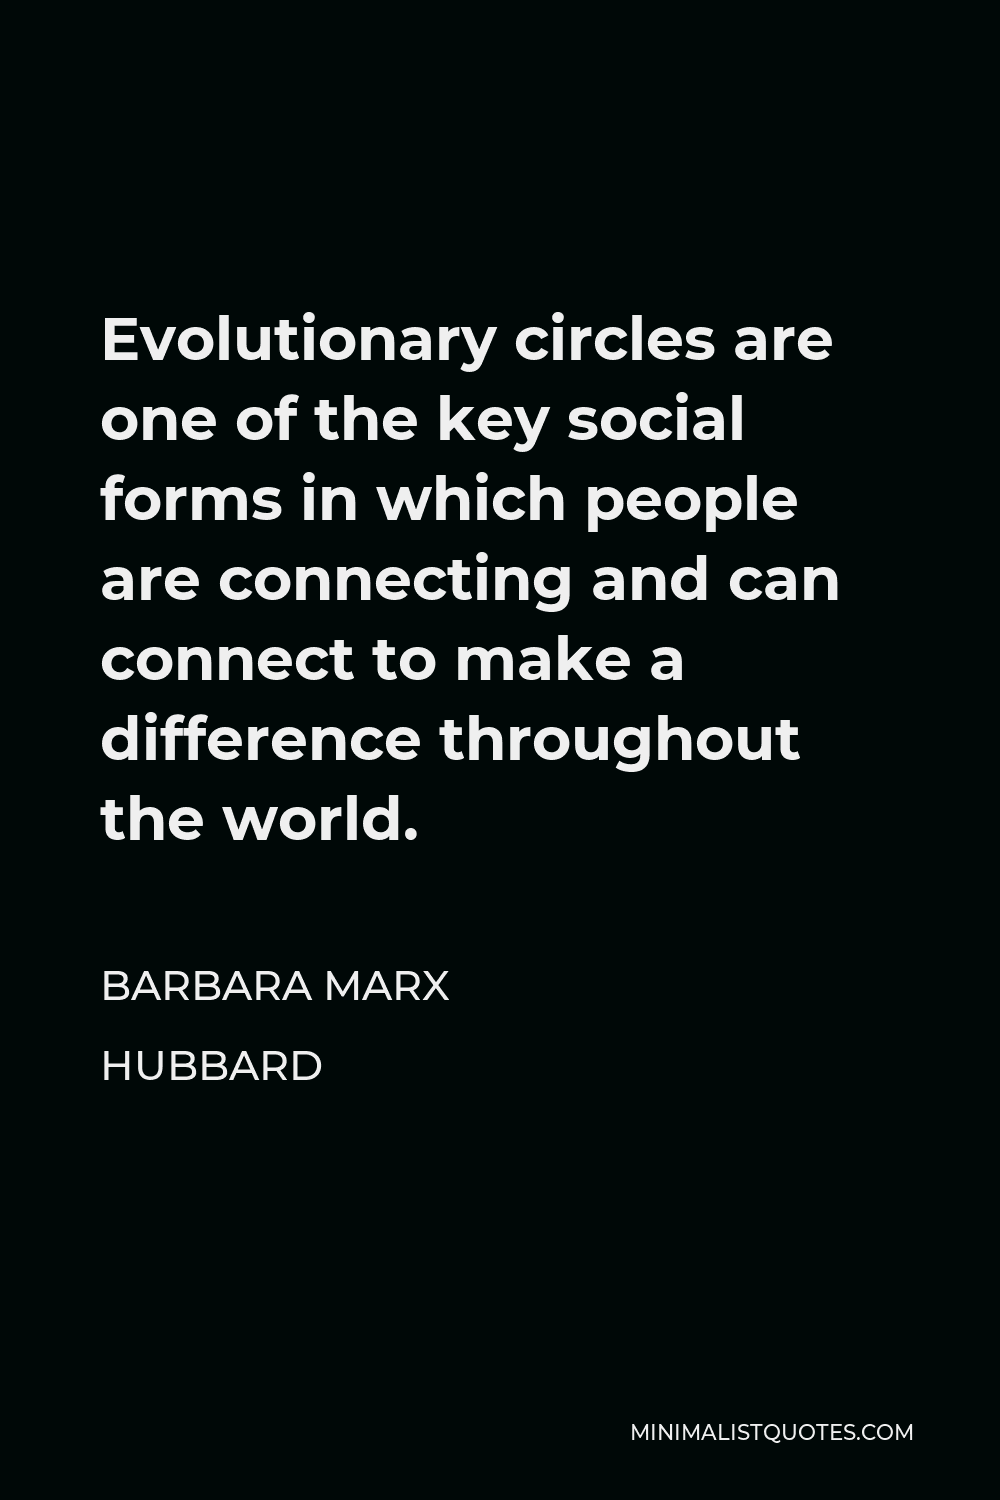 Barbara Marx Hubbard Quote - Evolutionary circles are one of the key social forms in which people are connecting and can connect to make a difference throughout the world.